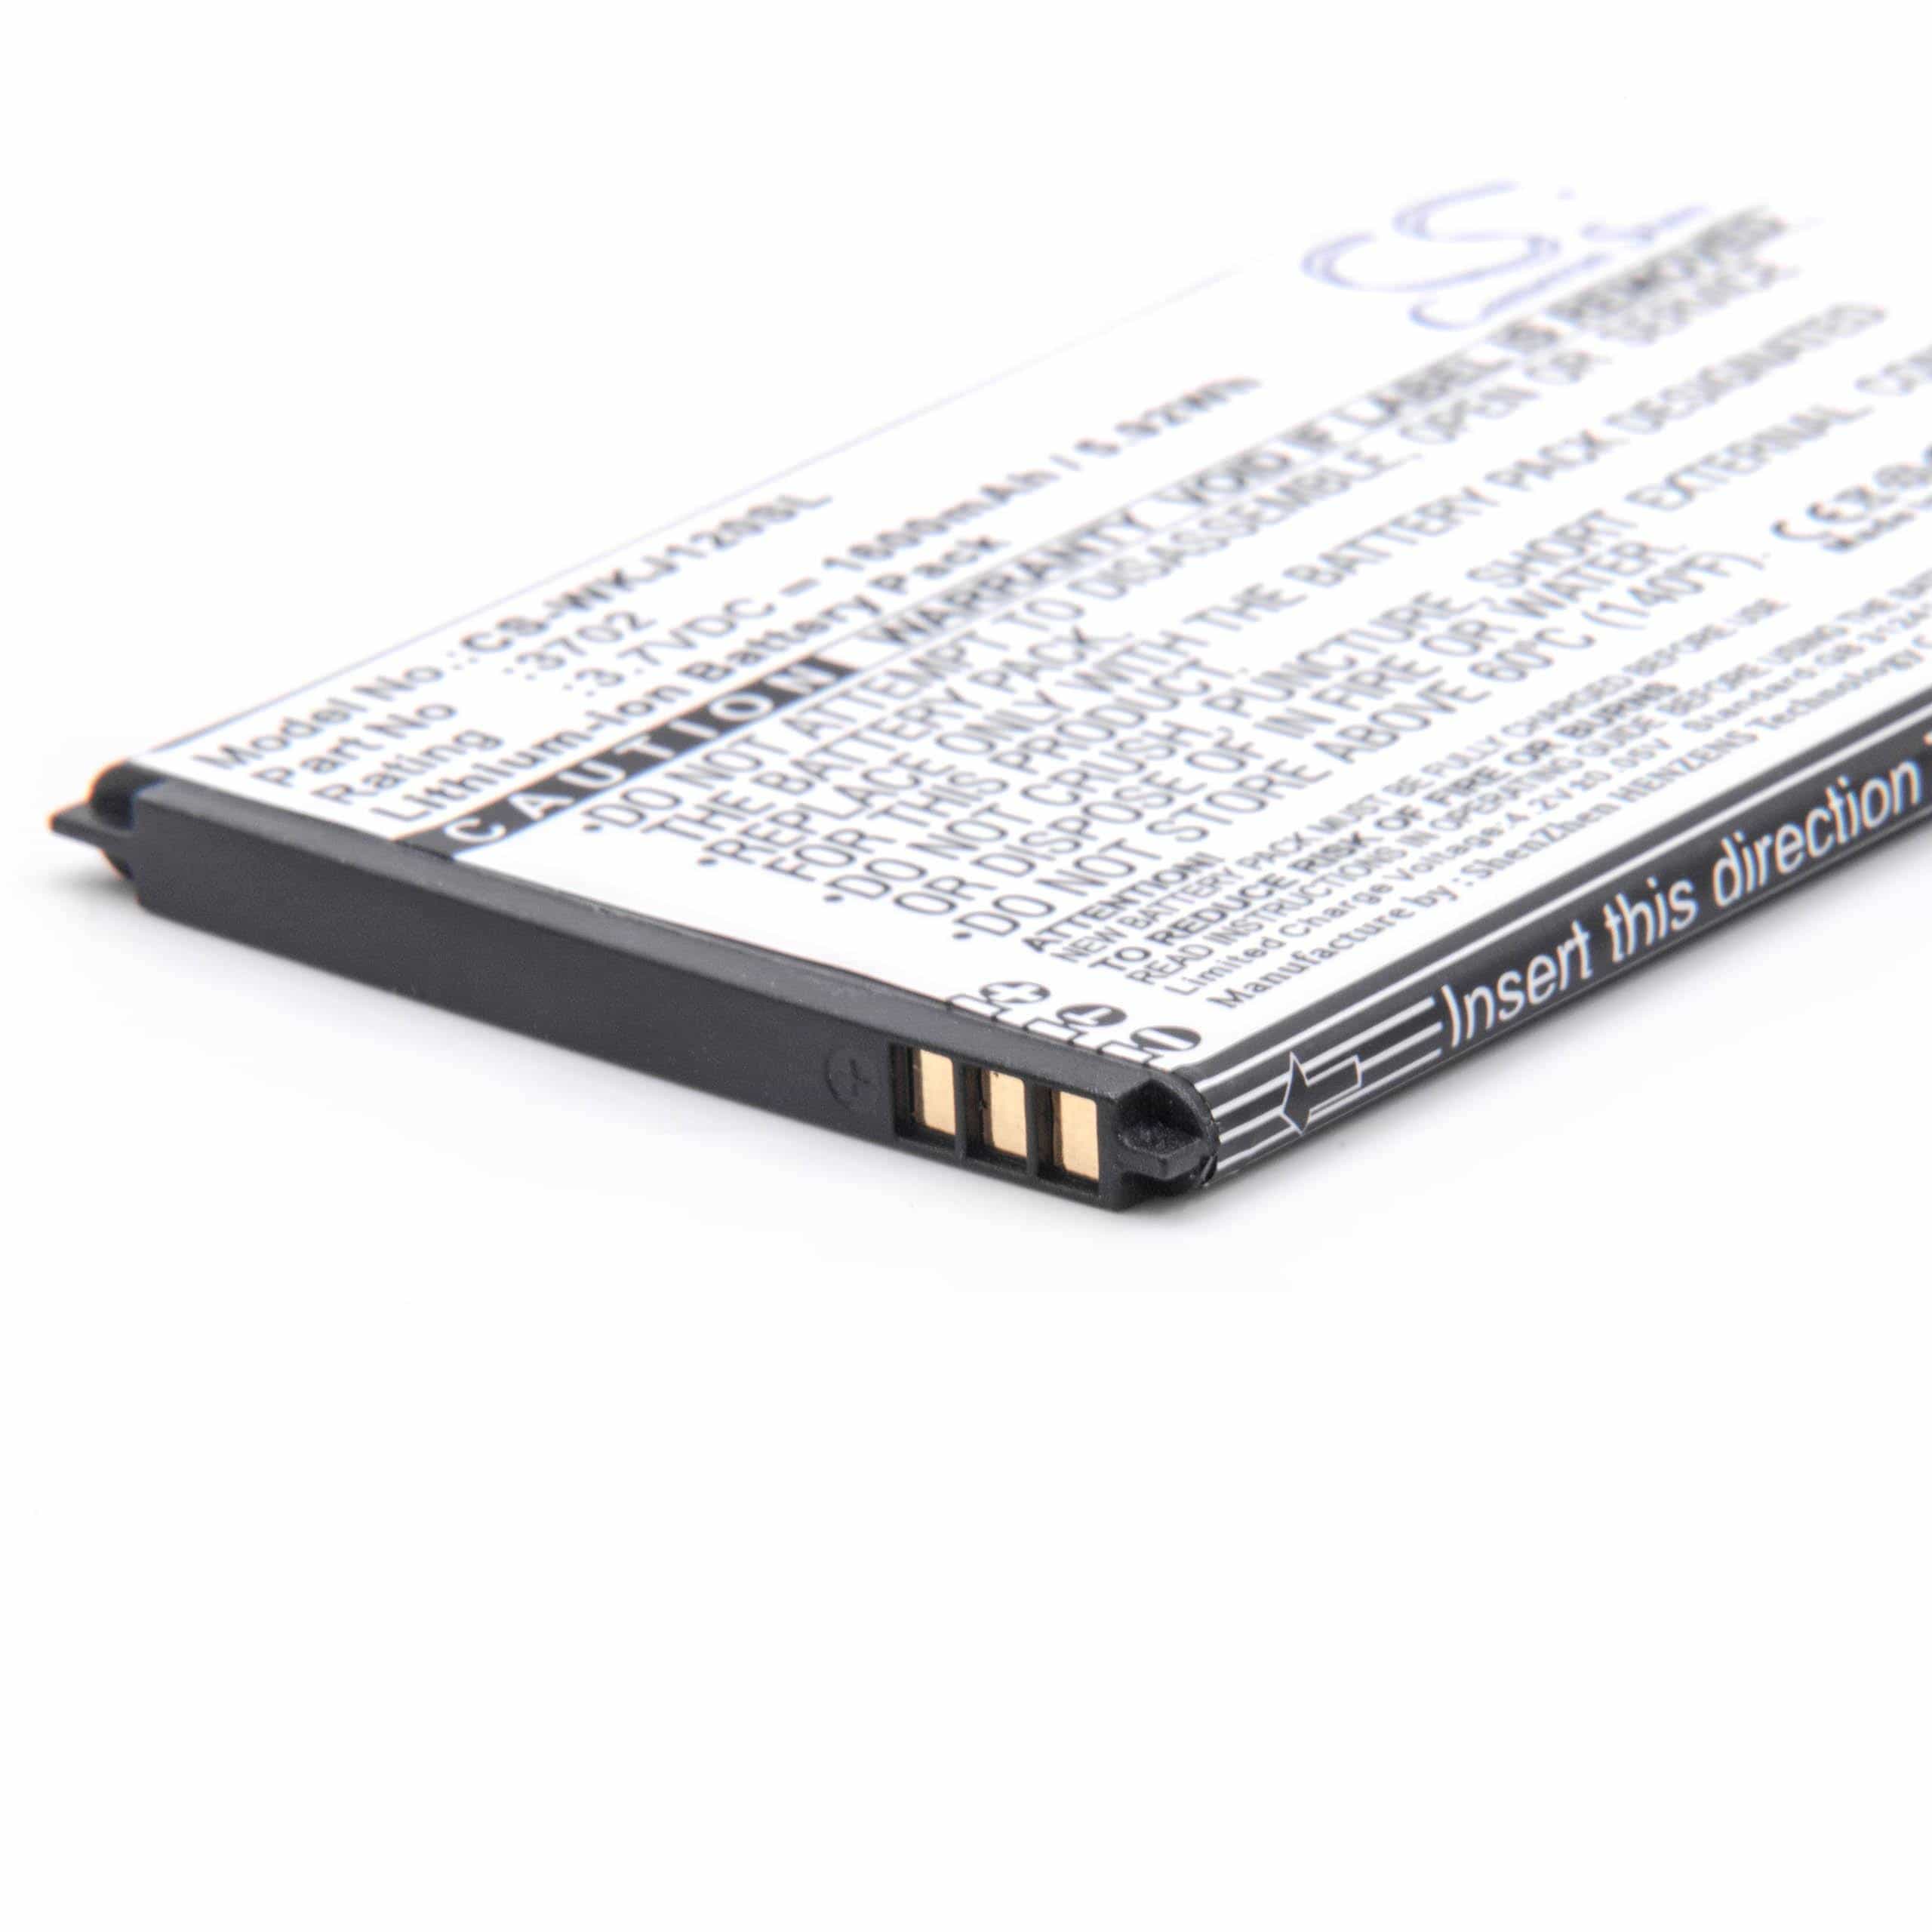 Mobile Phone Battery Replacement for Wiko 3702 - 1600mAh 3.7V Li-Ion